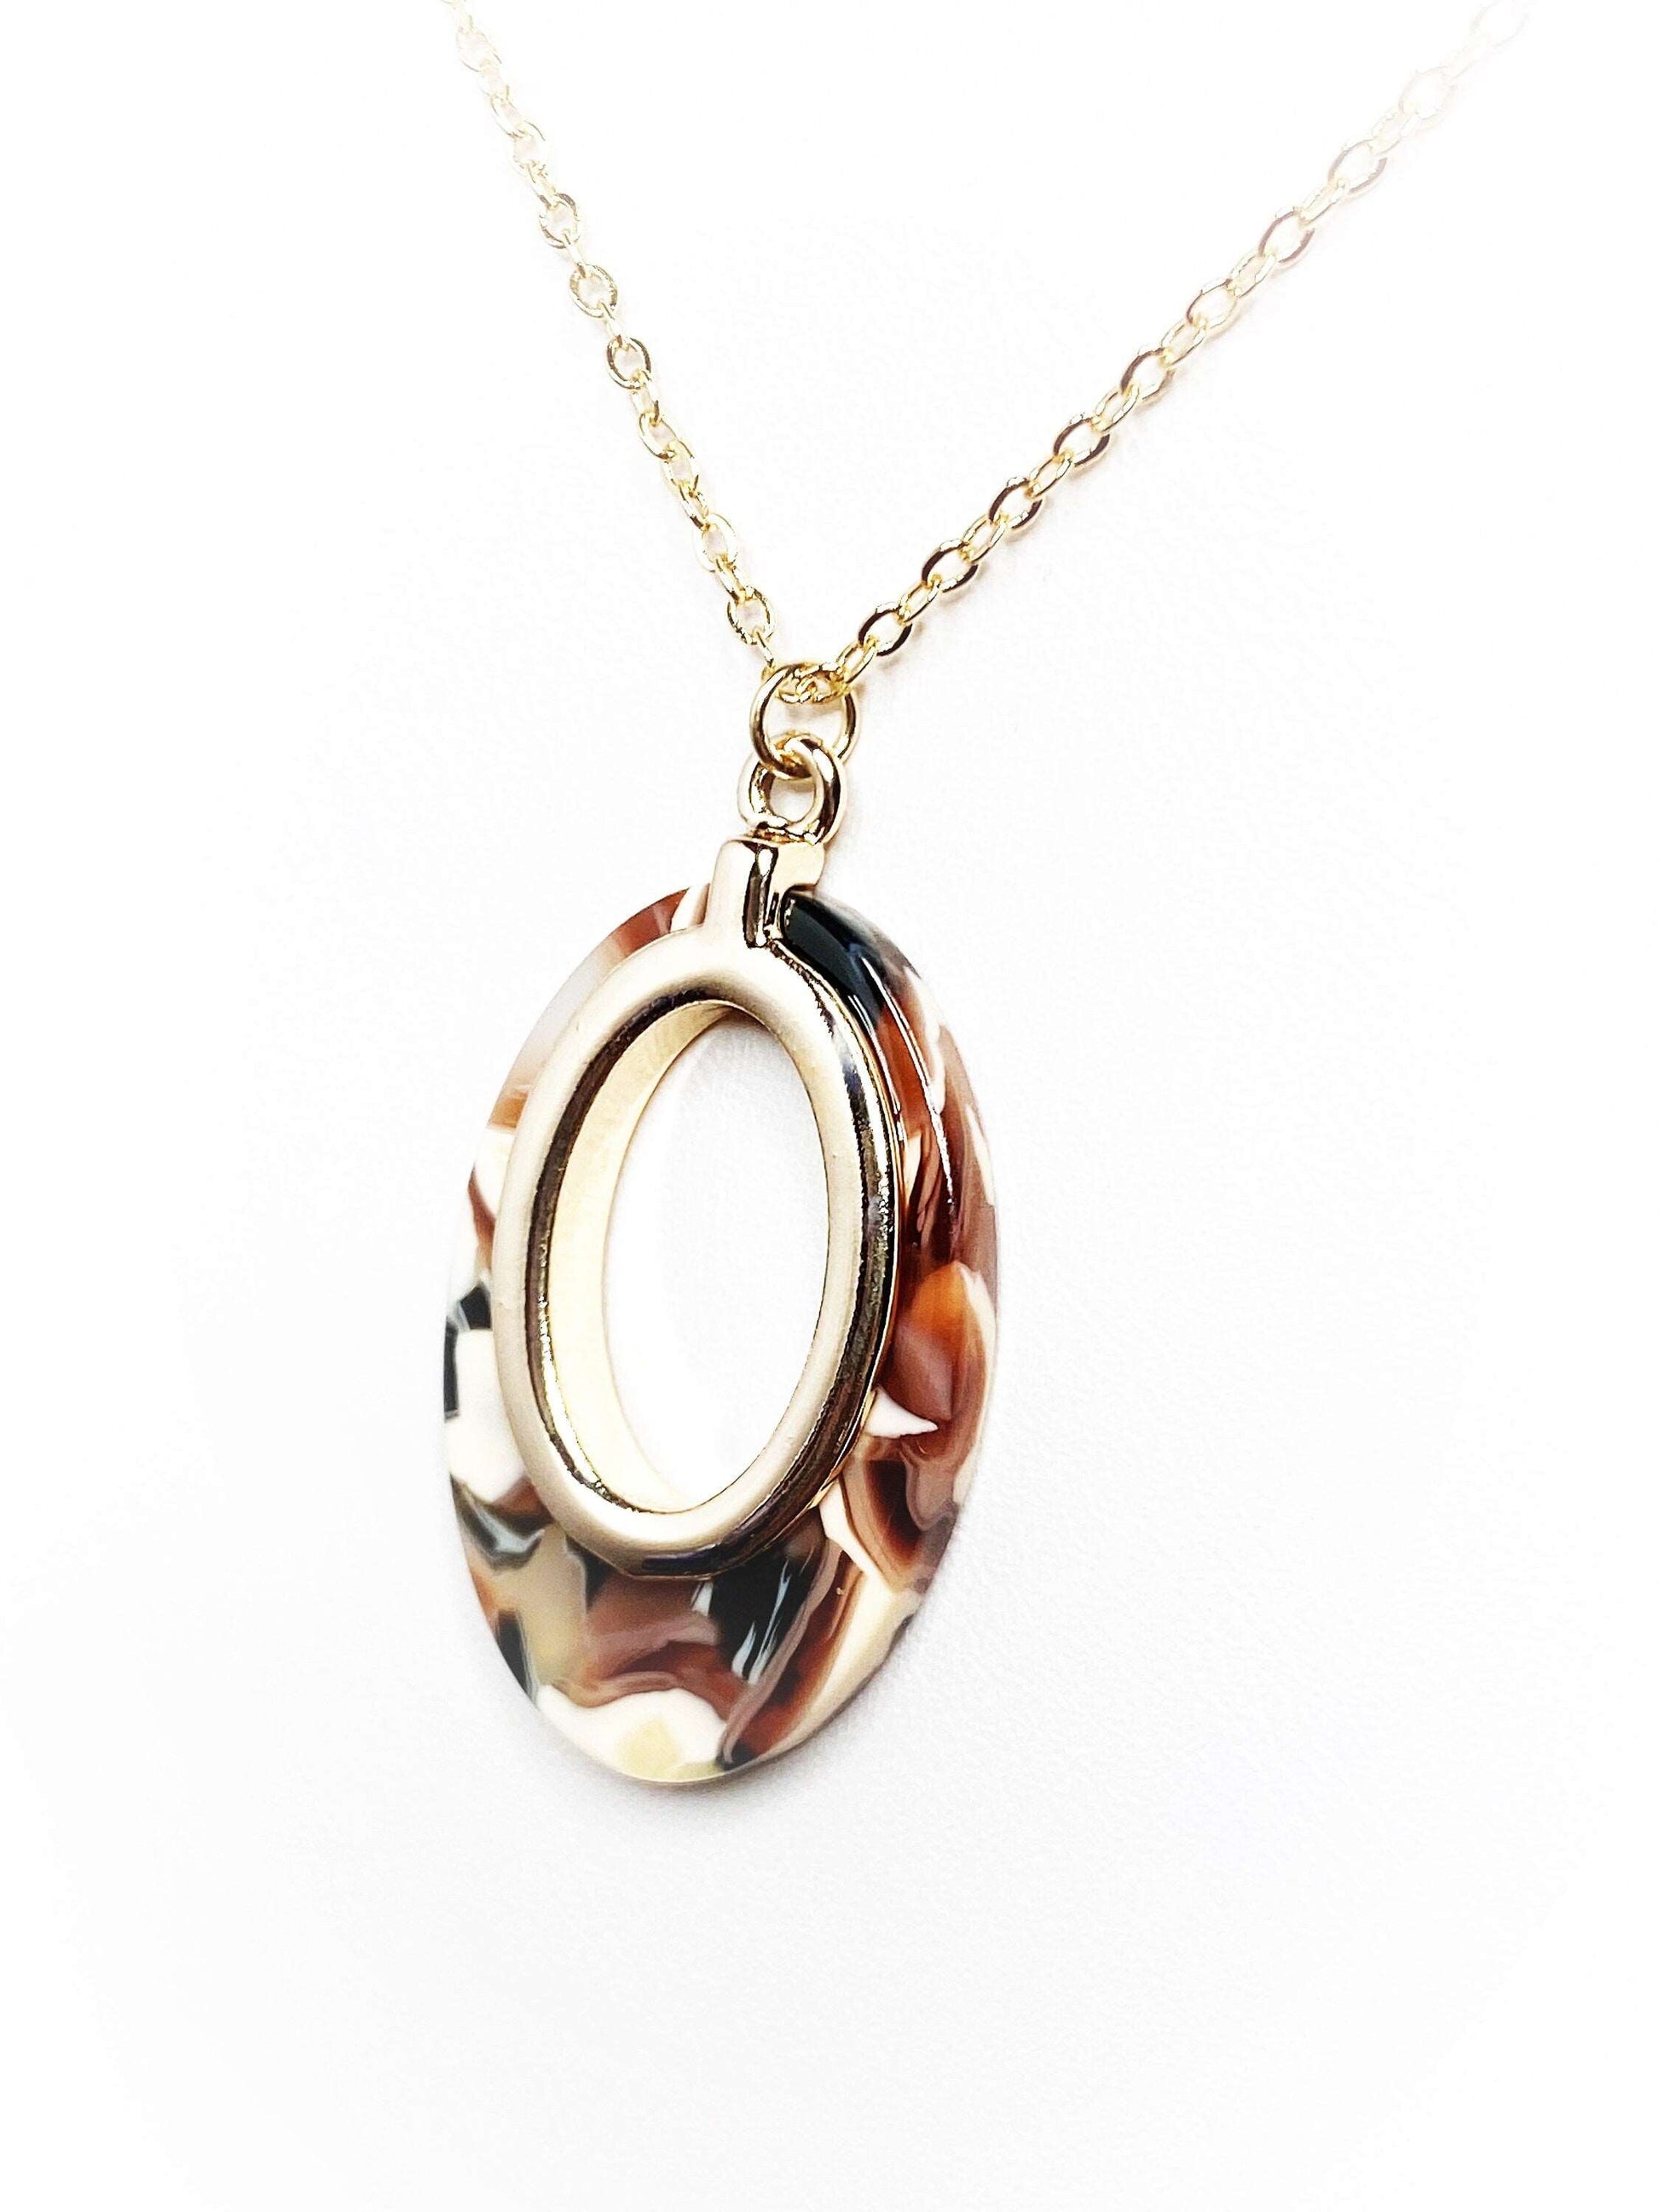 Brown Cream Gold Acrylic Pendant, 14kt Gold Filled, Tortoise Shell Oval Pendant, Women Birthday, Necklaces for Women, Acetate Necklace